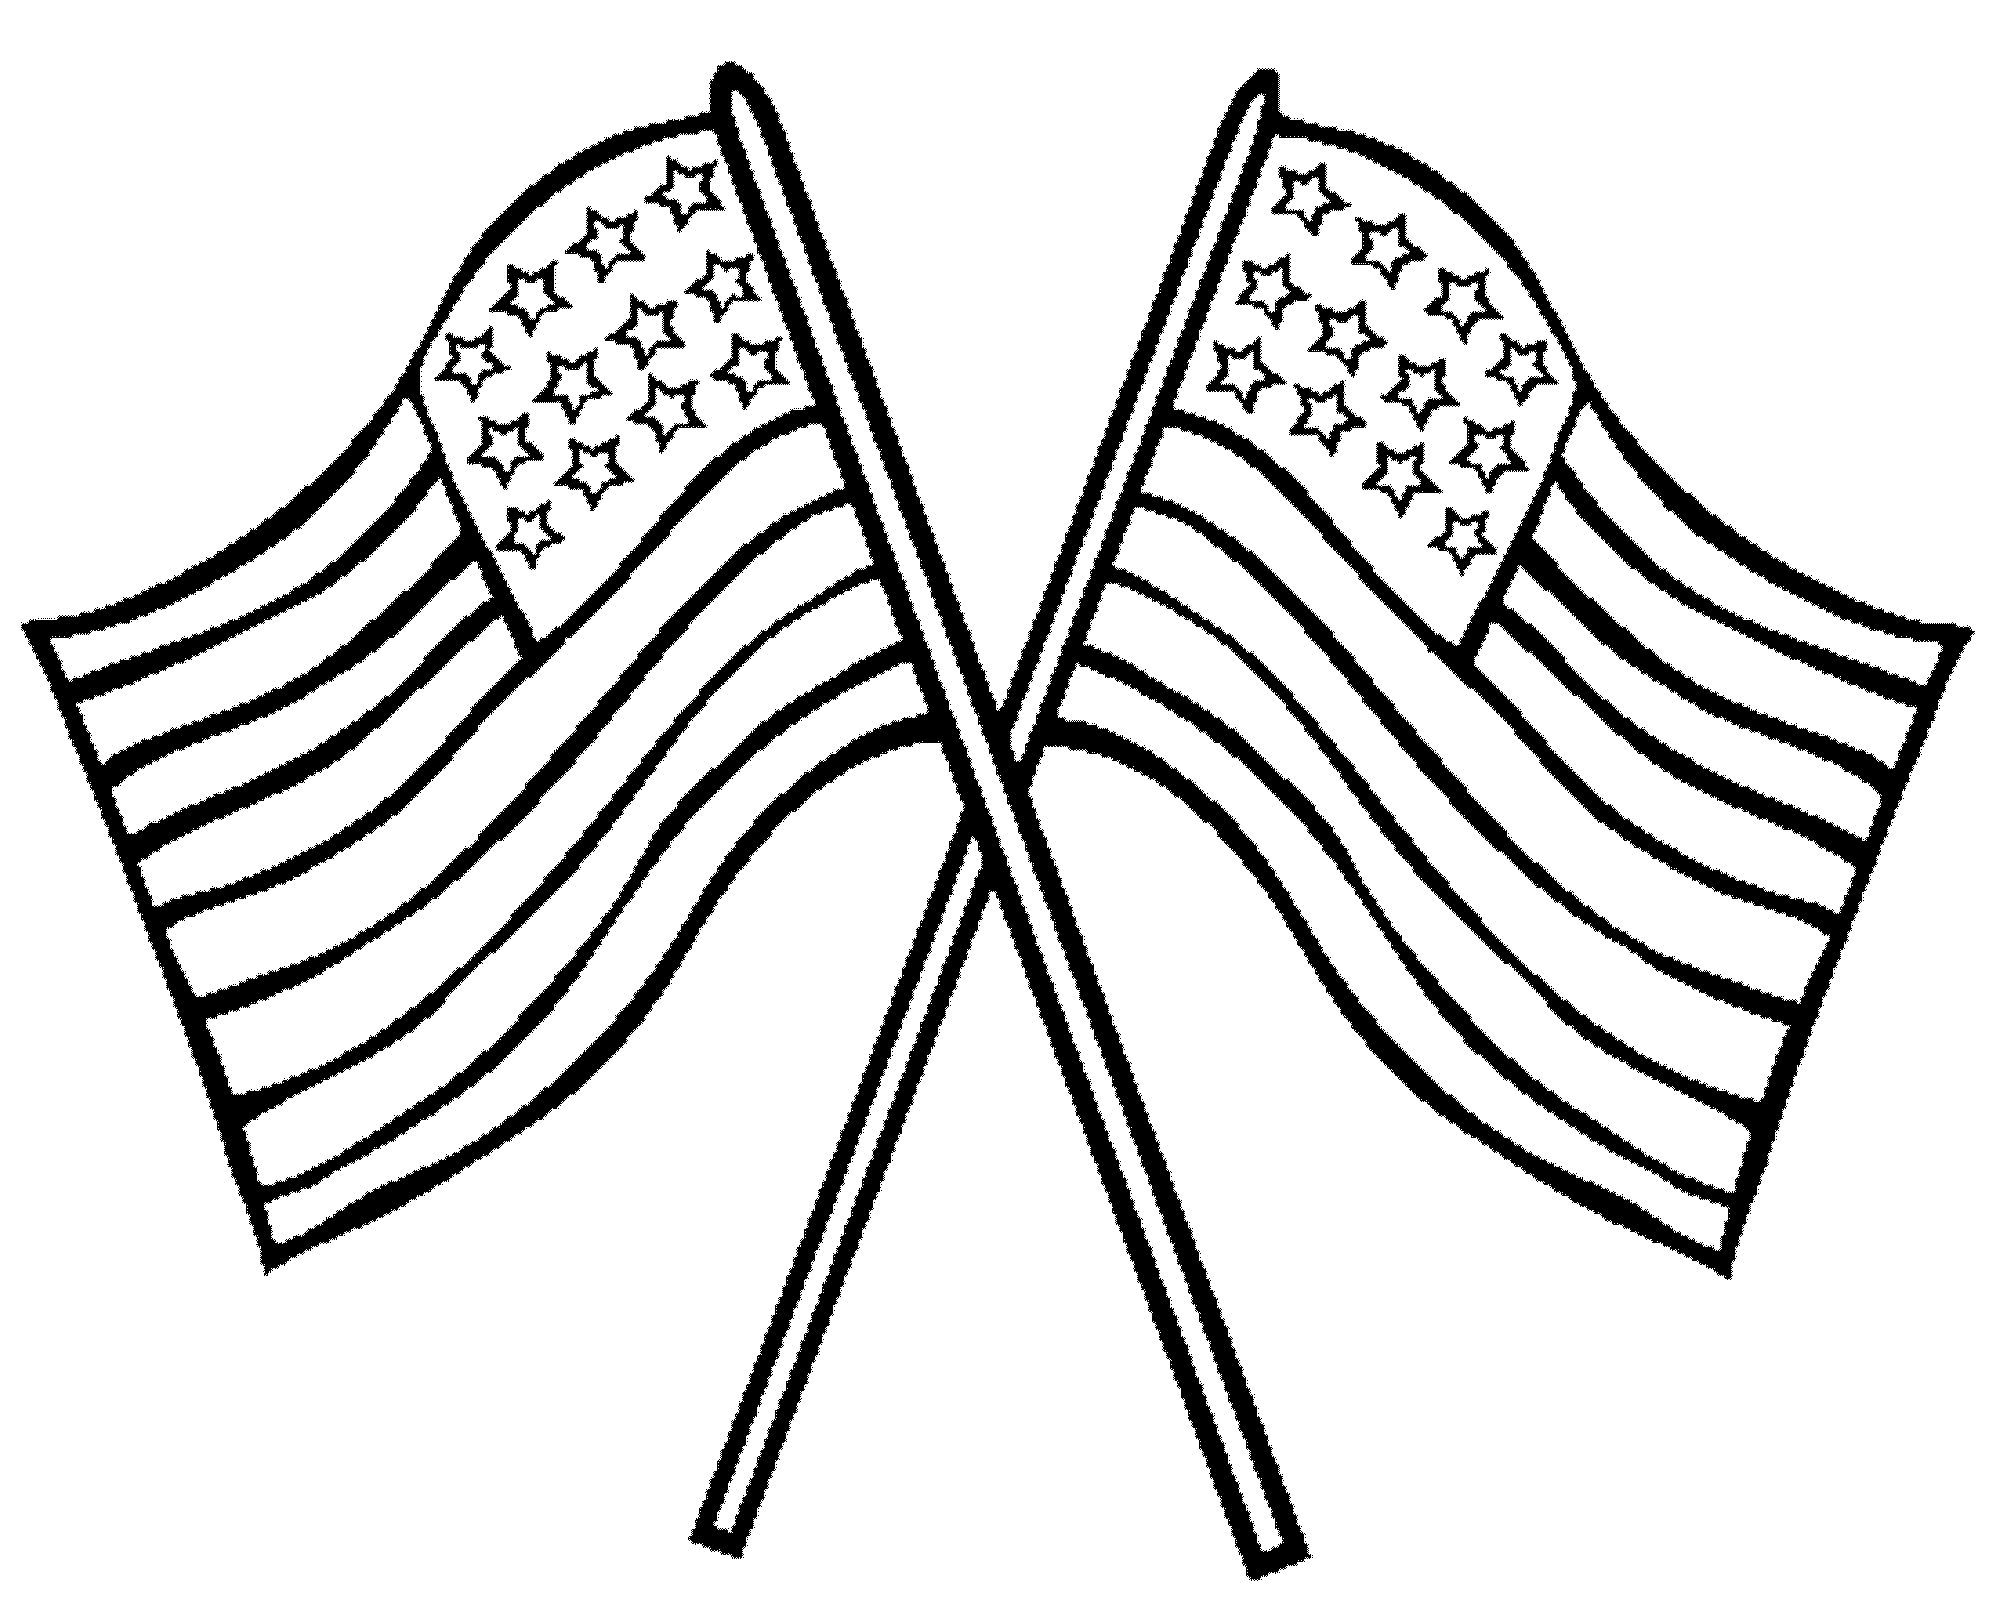 Two Crossed American Flags Coloring Page